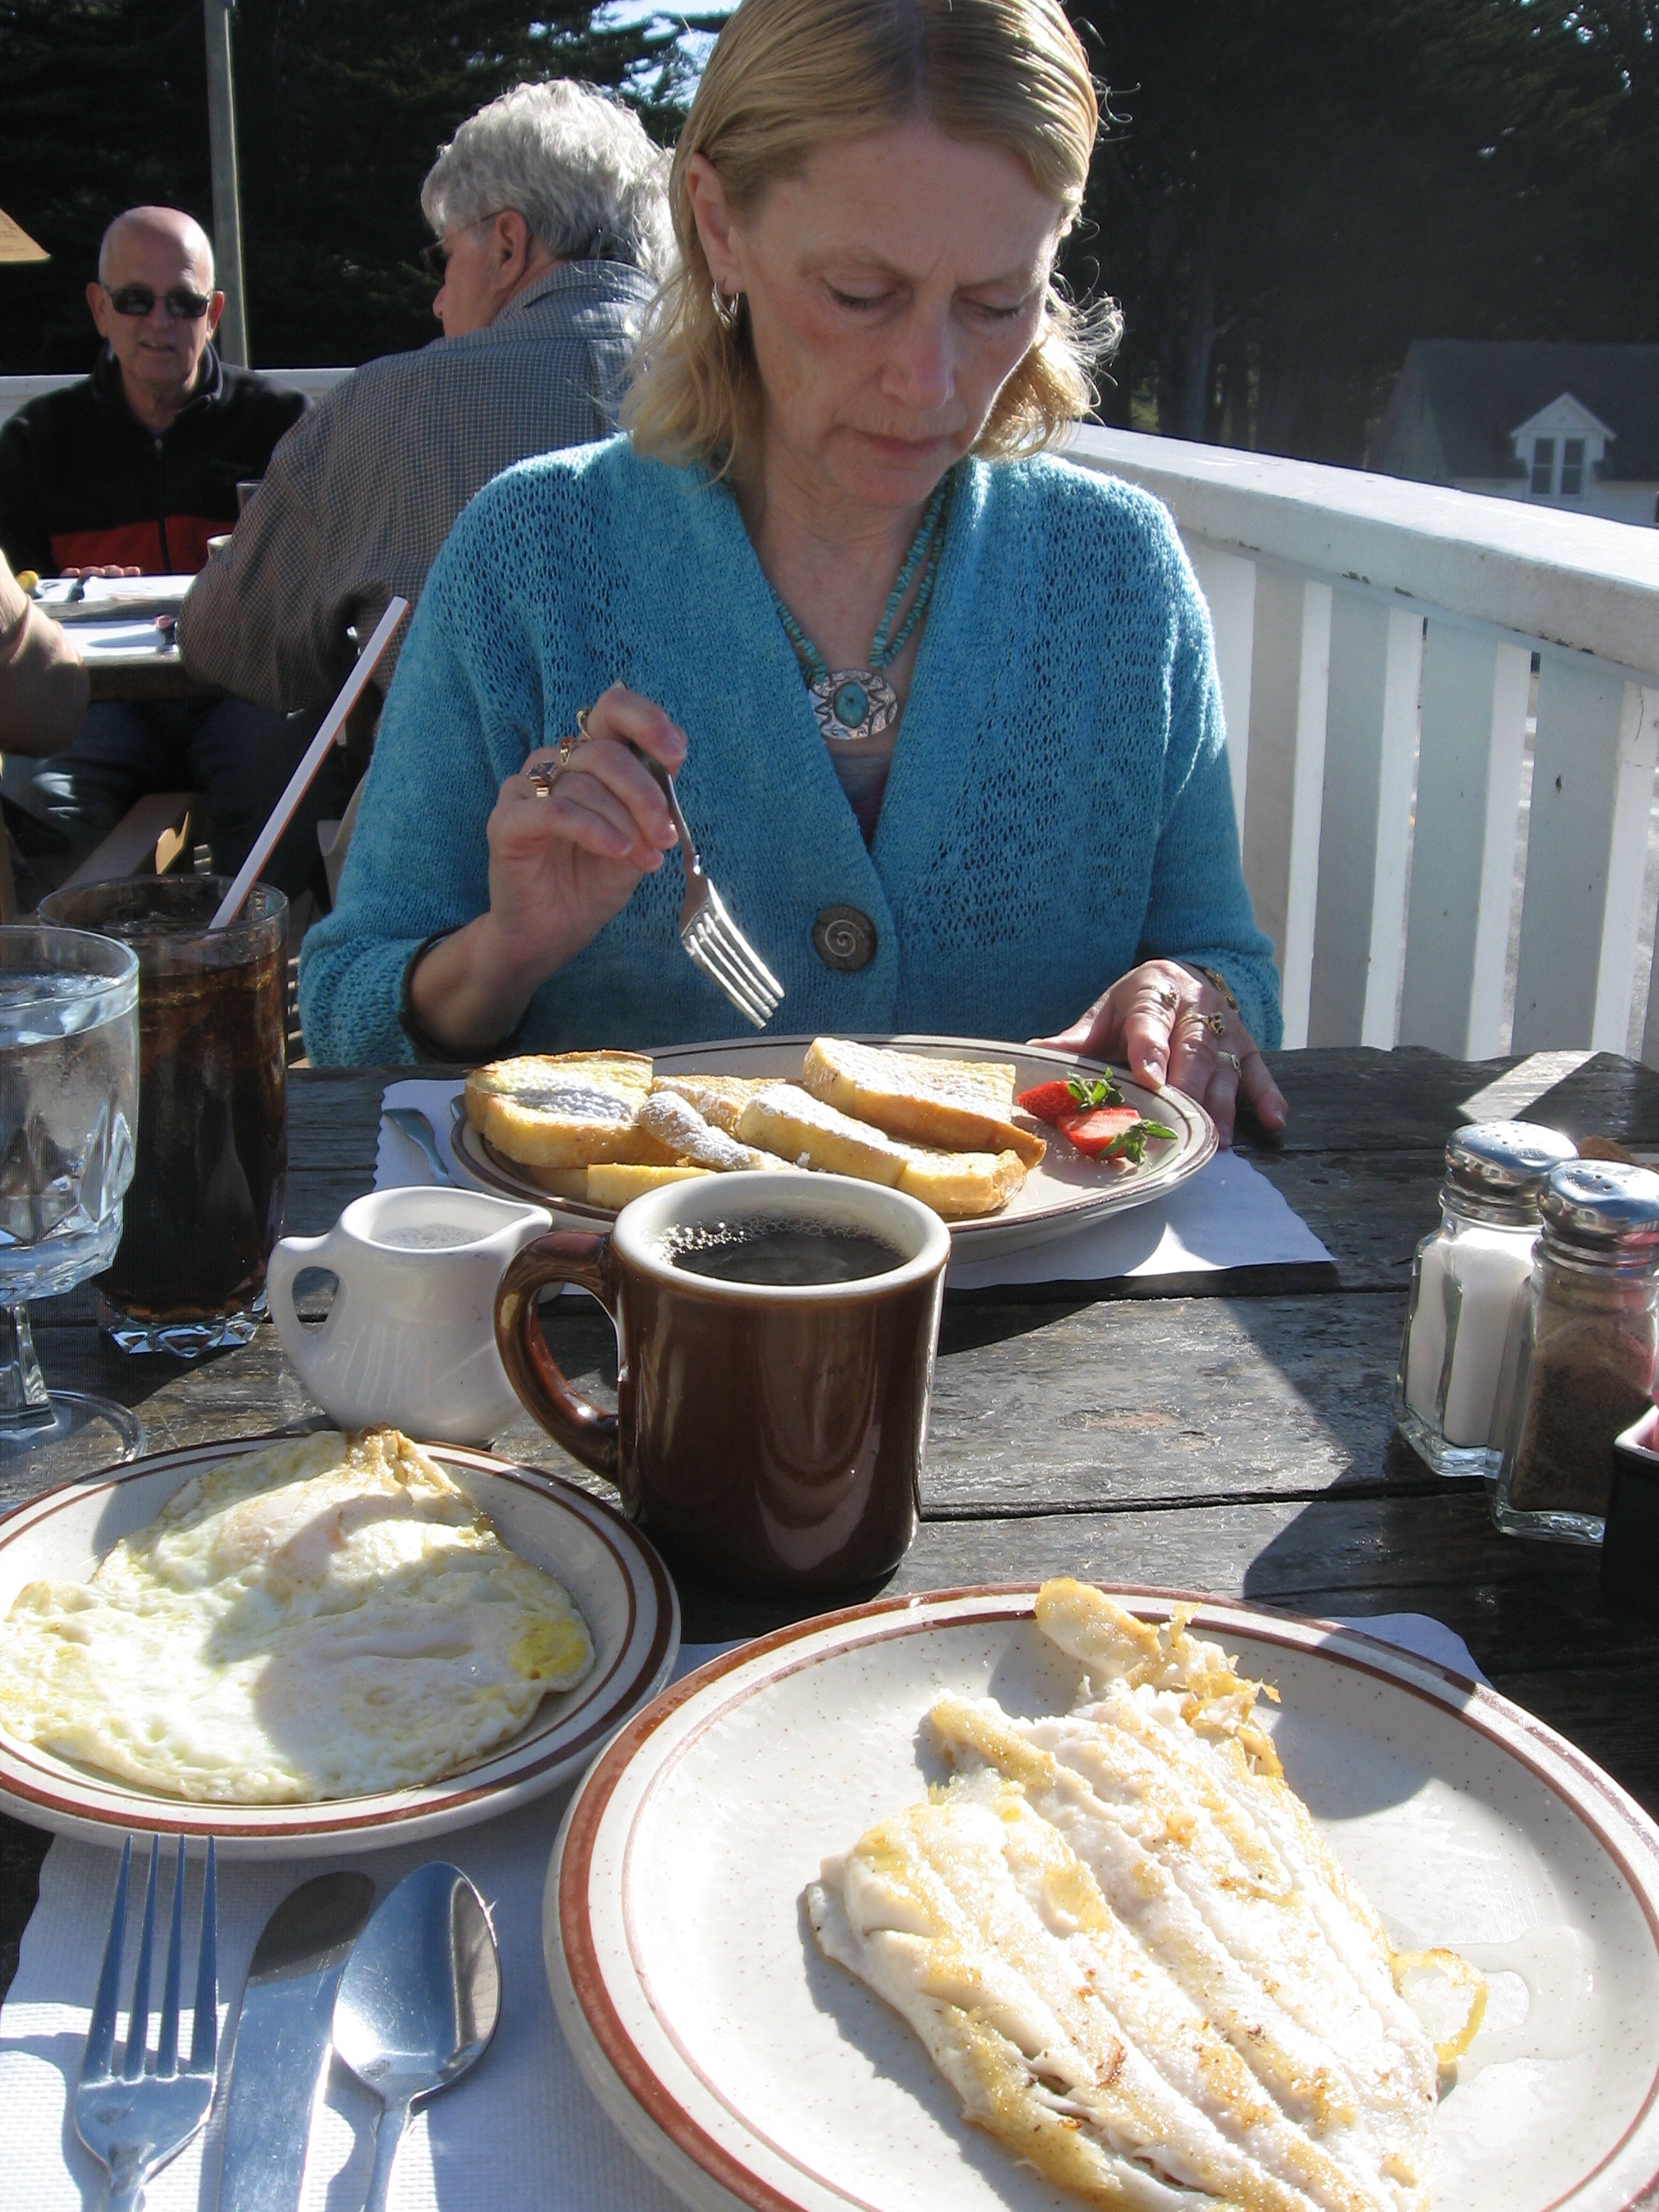 Sole and eggs in Mendocino